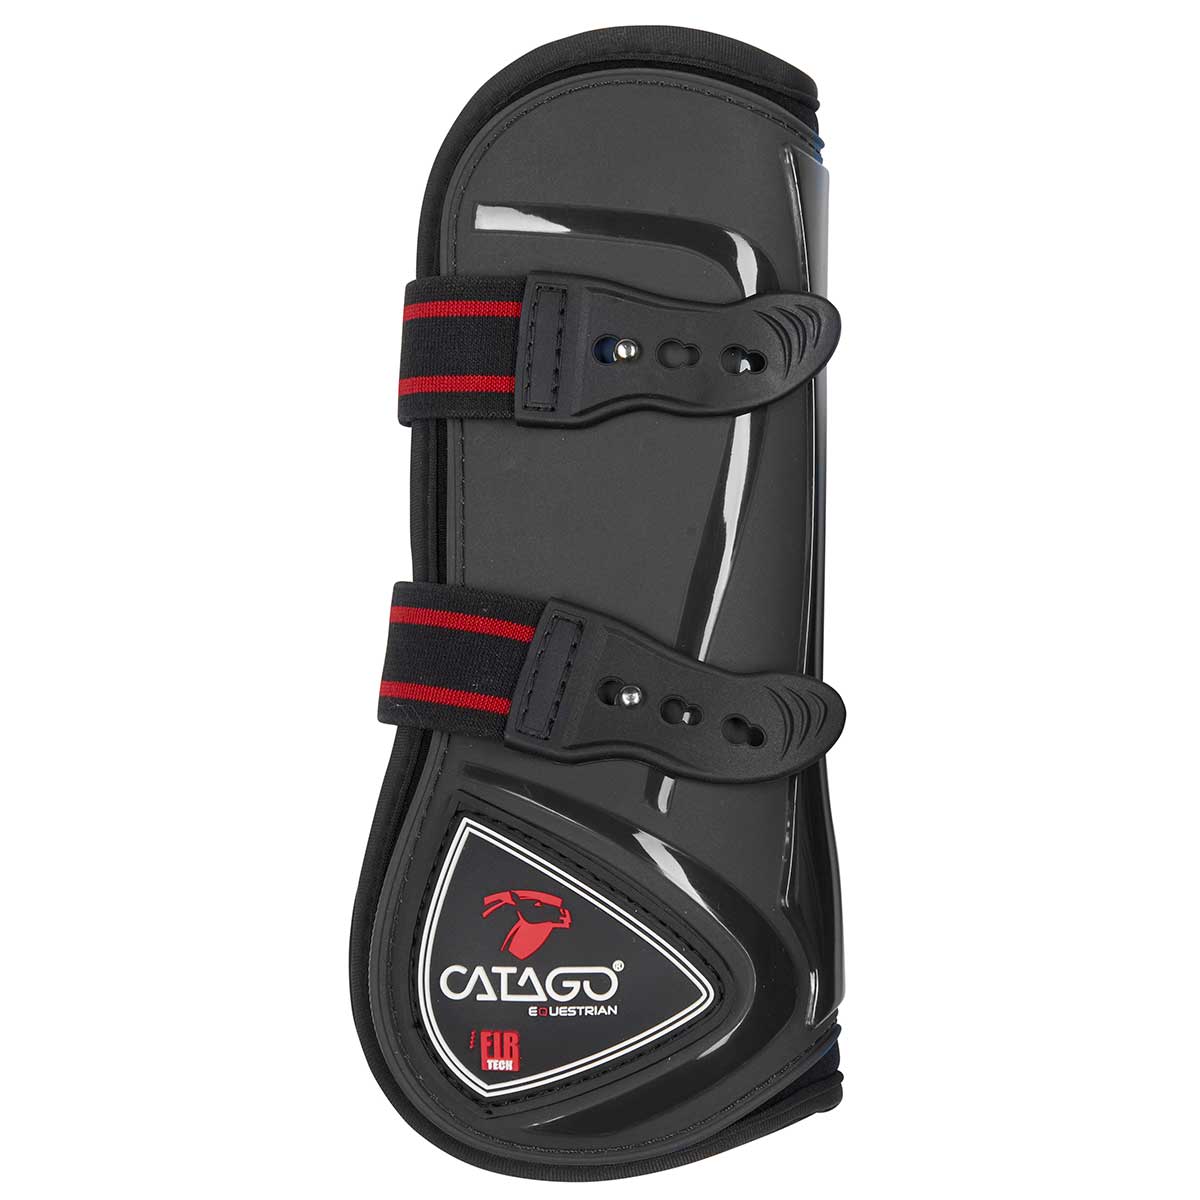 Catago FIR-Tech Therapy Tendon Boots